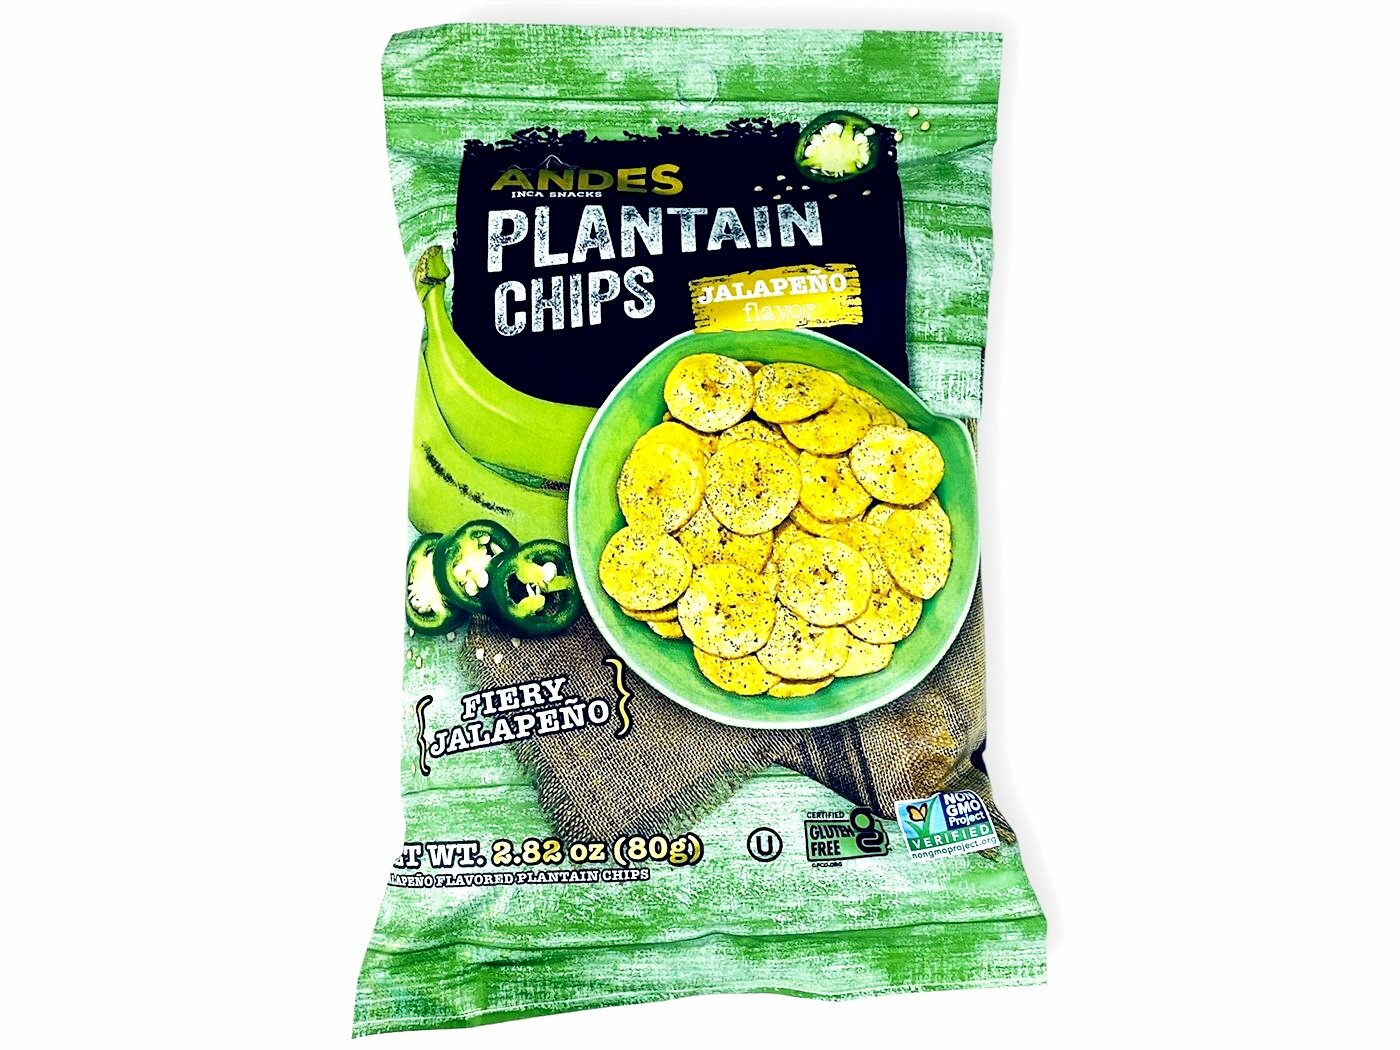 Andes Plantain Chips Jalapeno Flavor